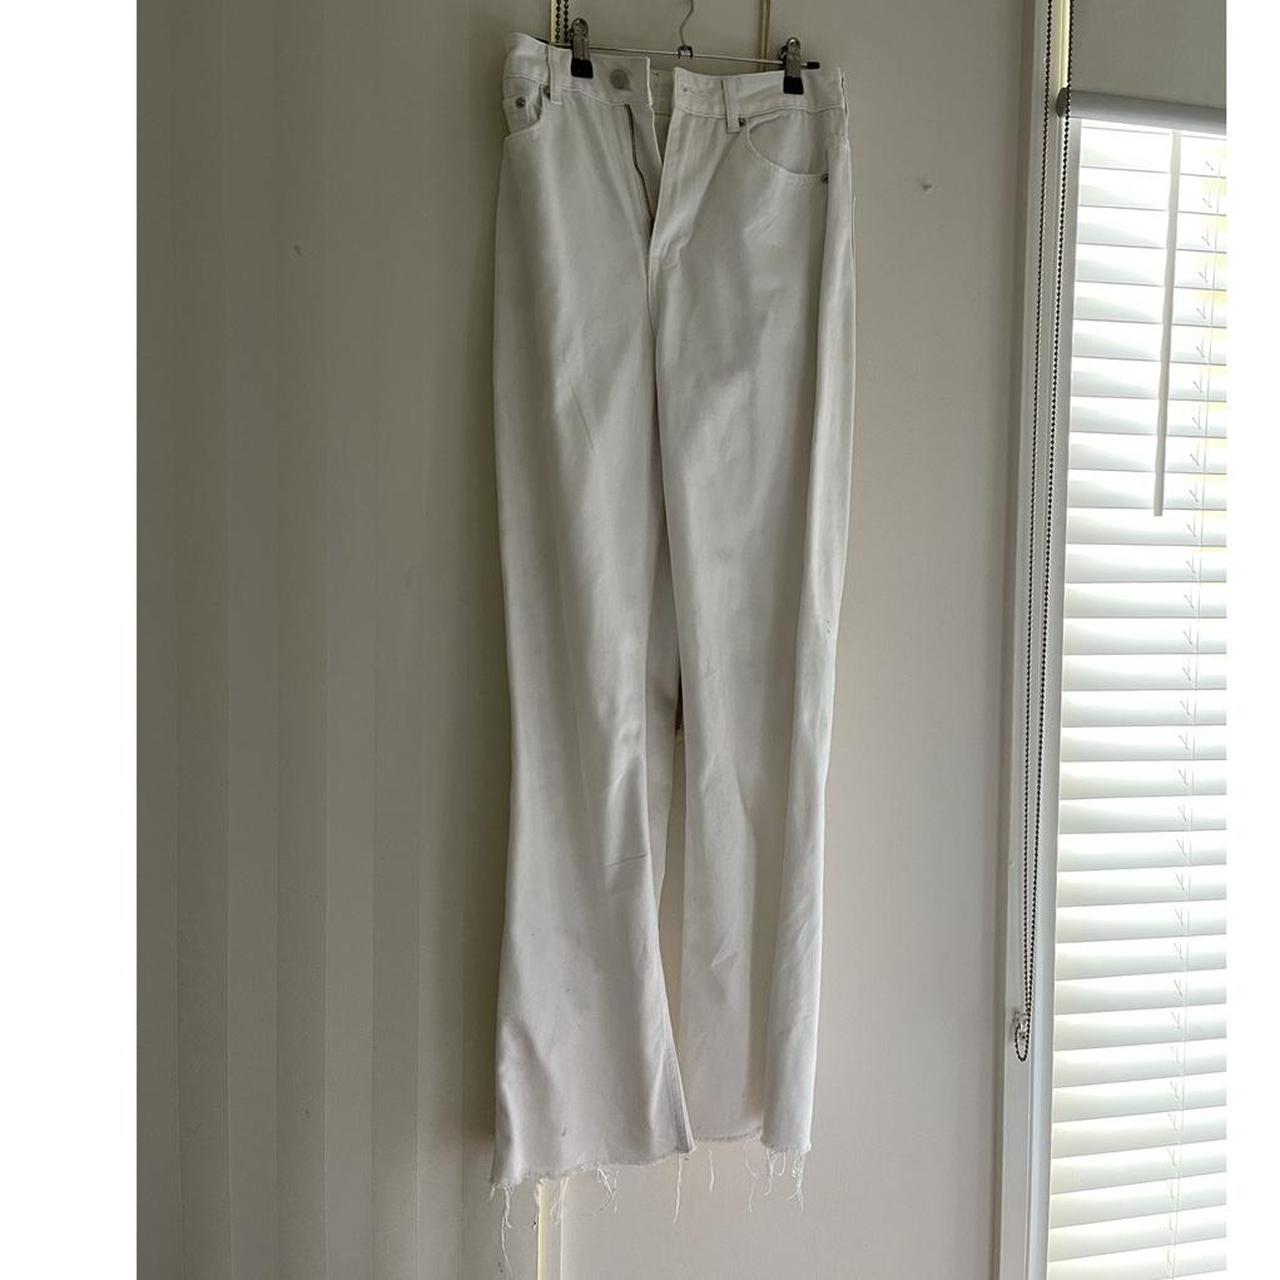 Glassons Women's White and Cream Jeans | Depop